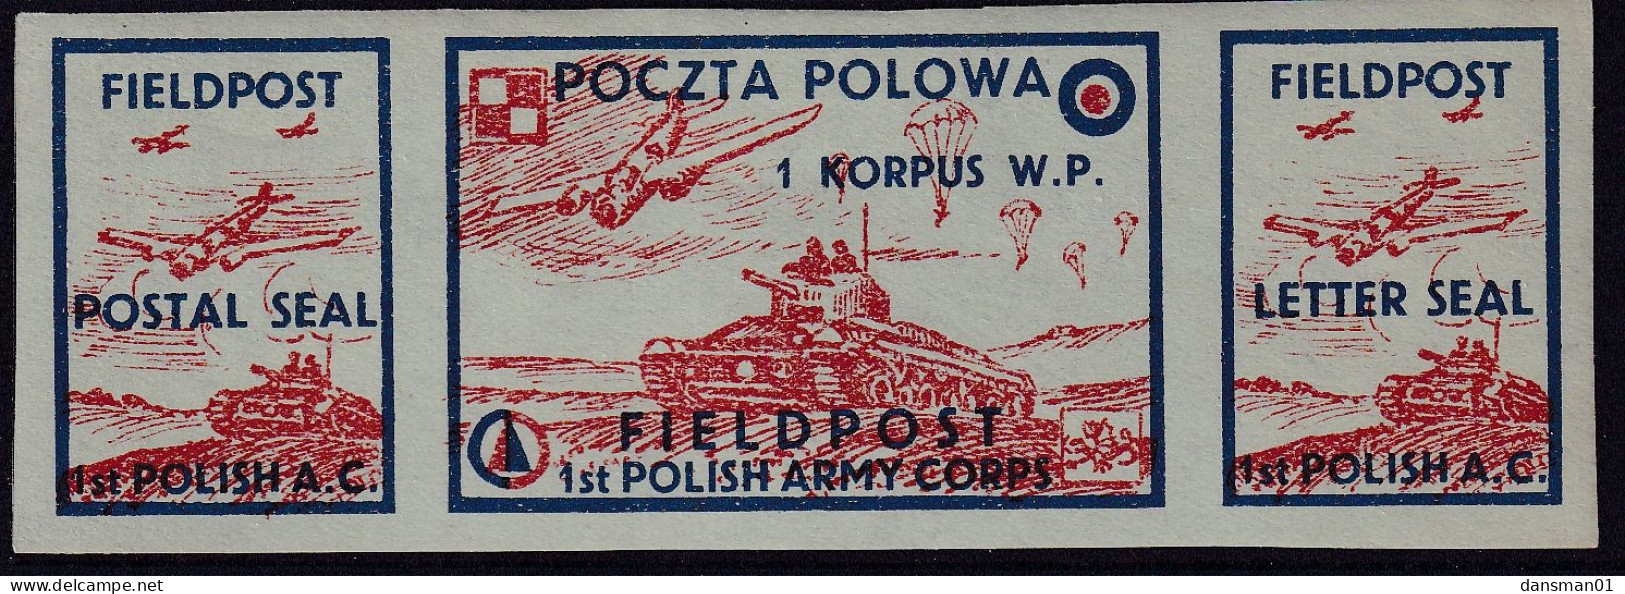 POLAND 1942 Field Post Seals Strip Smith FL2-4 Mint Hinged (Green Paper) - Liberation Labels